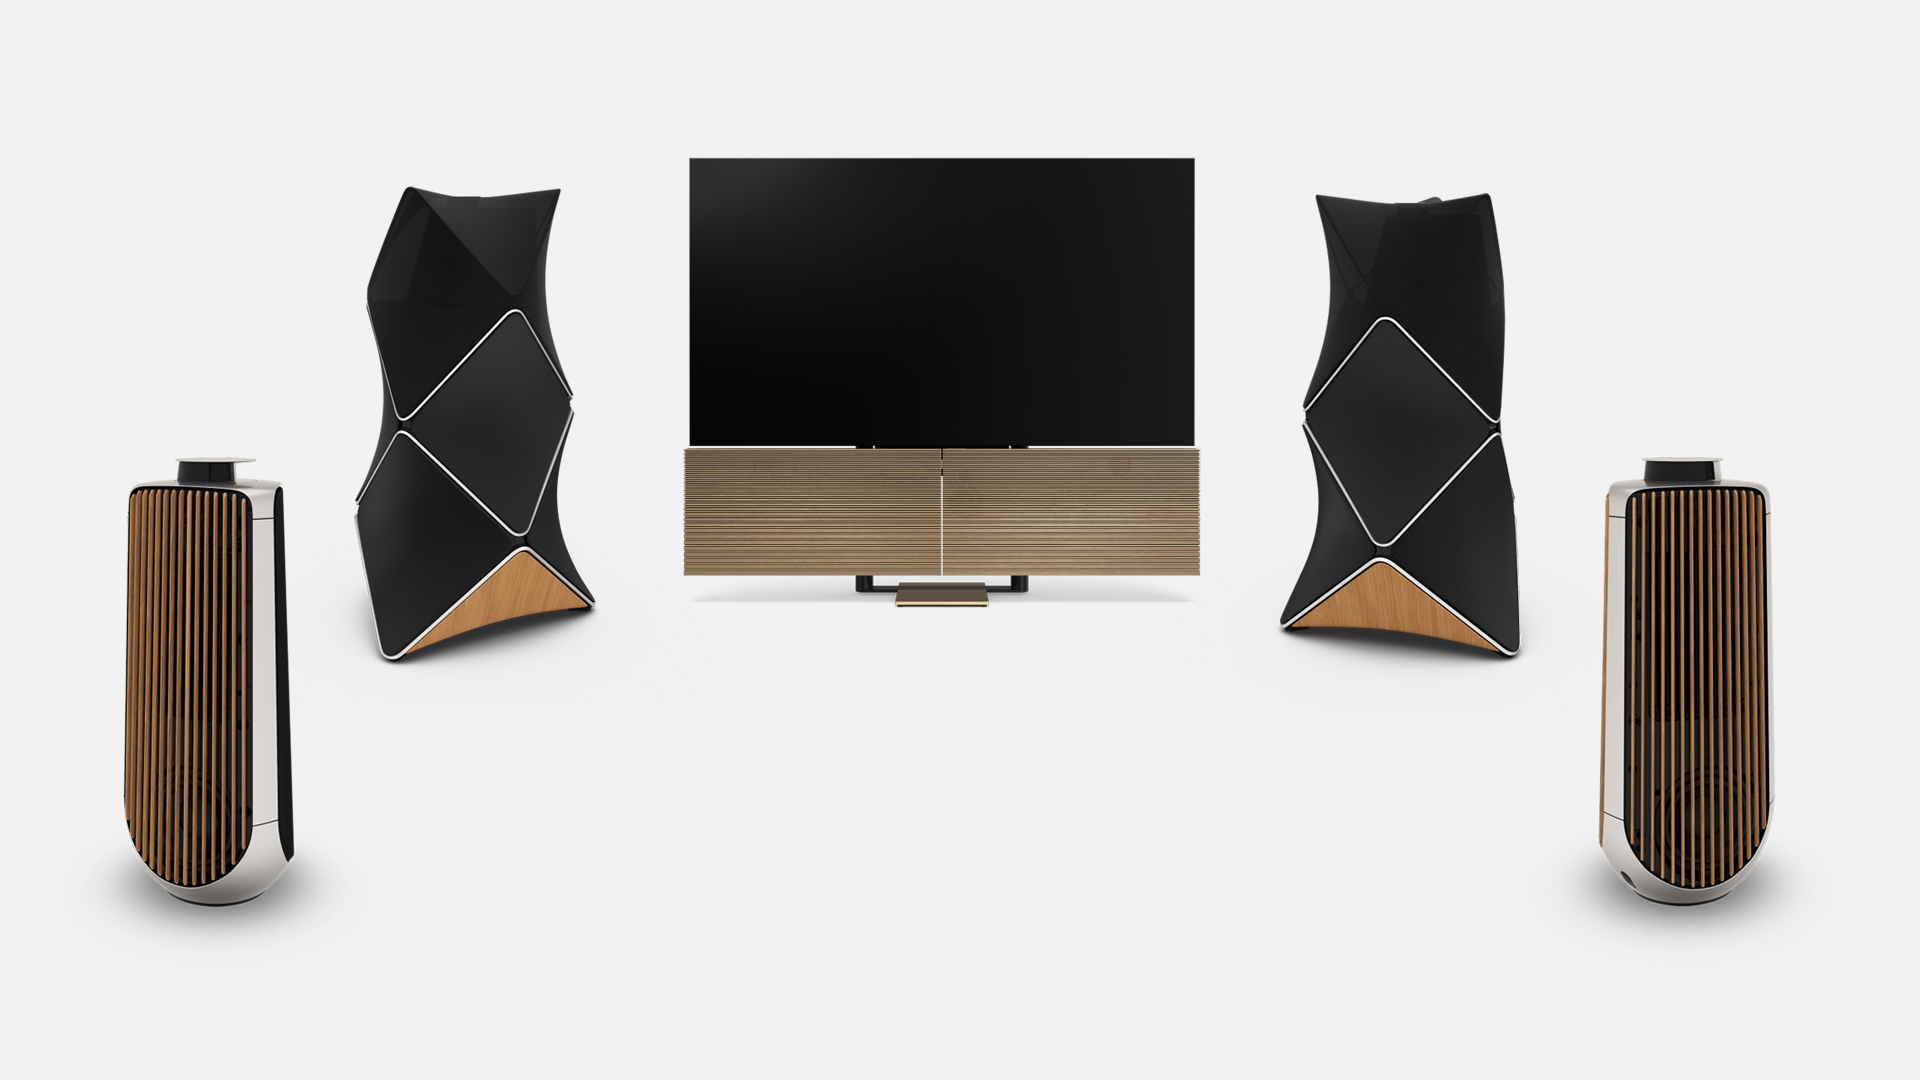 gek voorkant D.w.z Home Theatre Systems | Bang & Olufsen